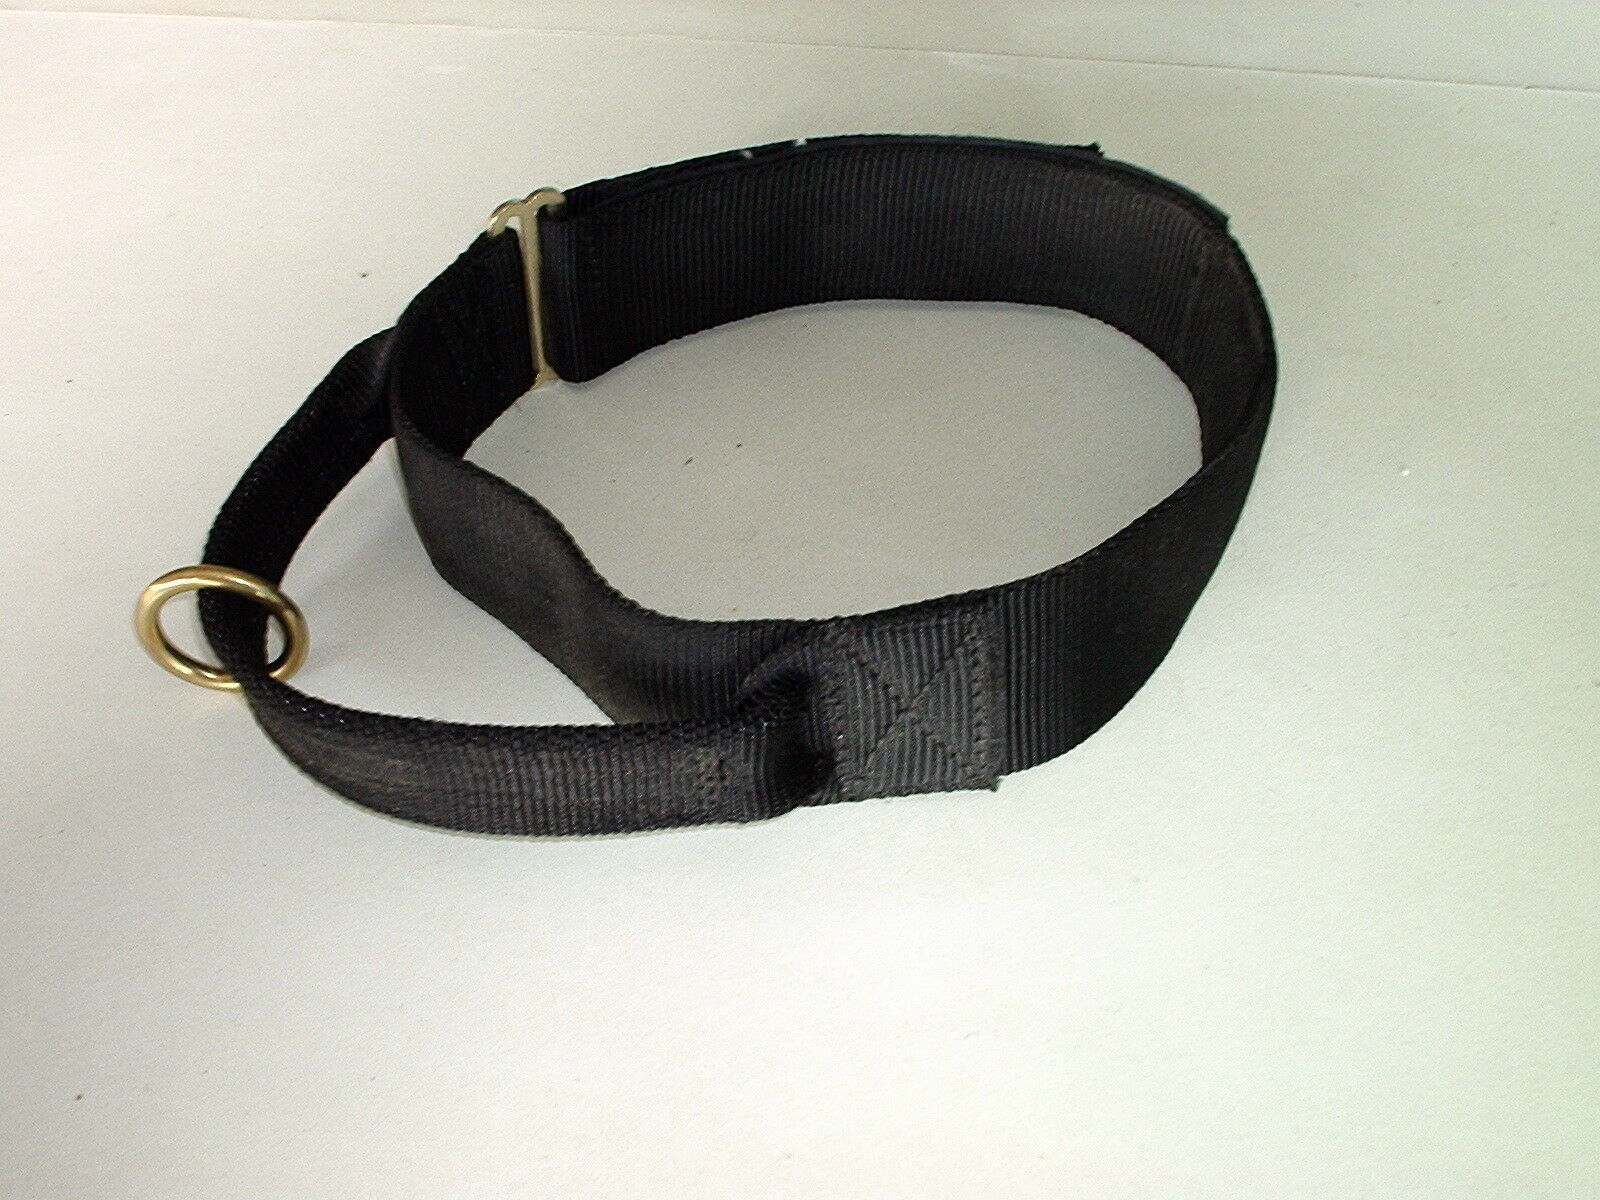 Primary image for 2IN WORKING DOG TRAINING COLLAR WITH HANDLE VERRY STRONG POLICE K9 SCHUTZHUND